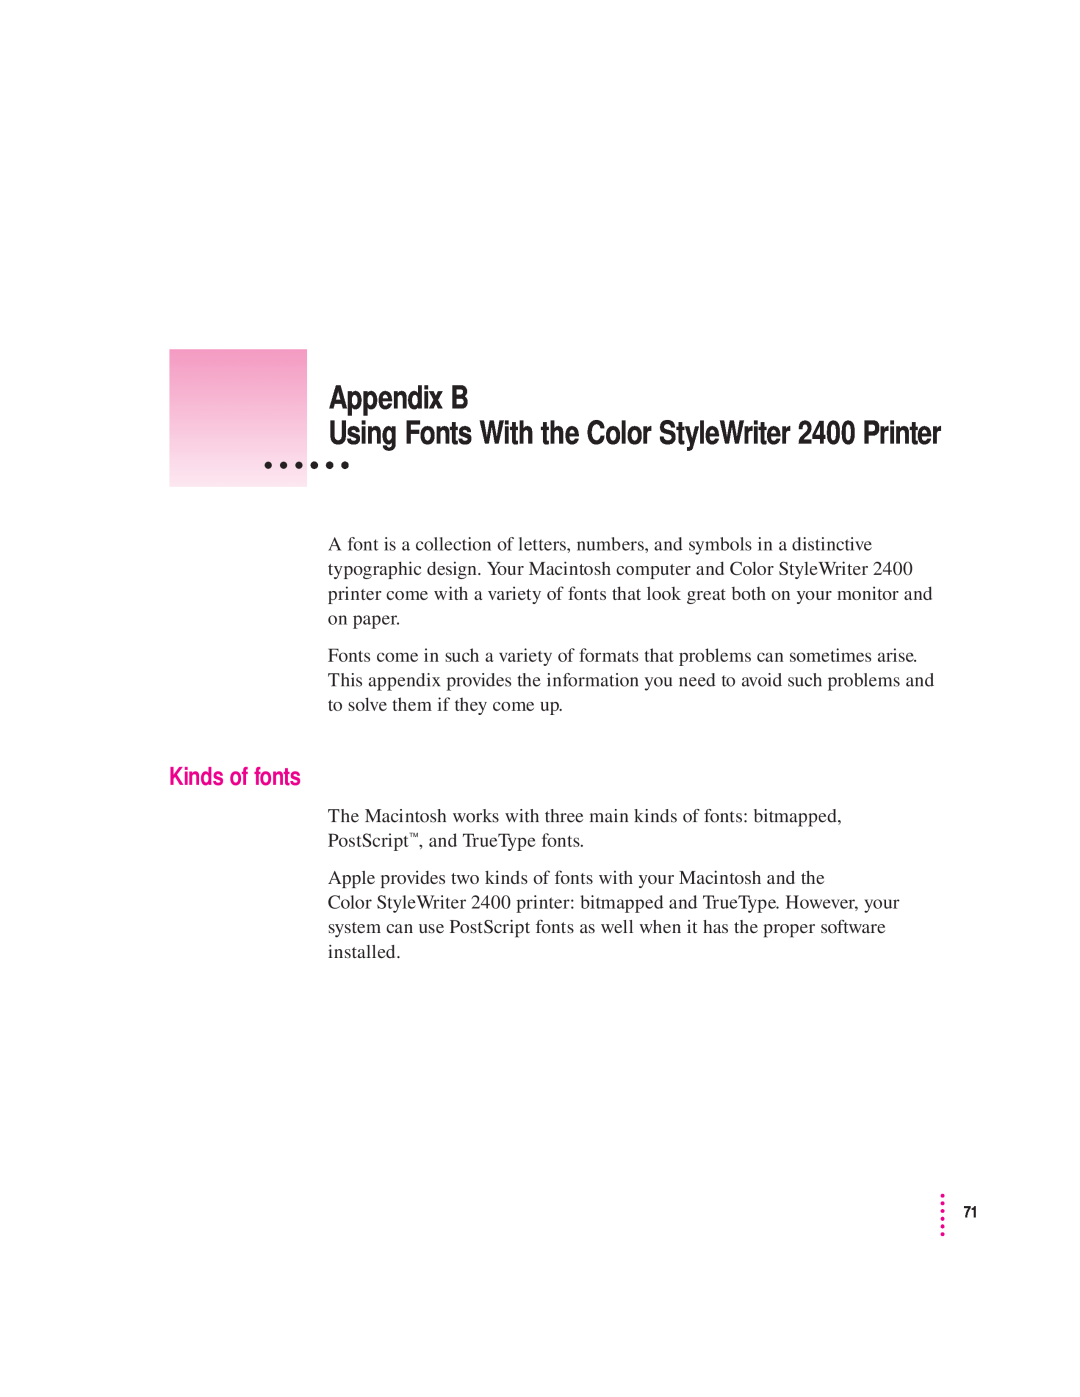 Apple manual Appendix B, Kinds of fonts, Using Fonts With the Color StyleWriter 2400 Printer 